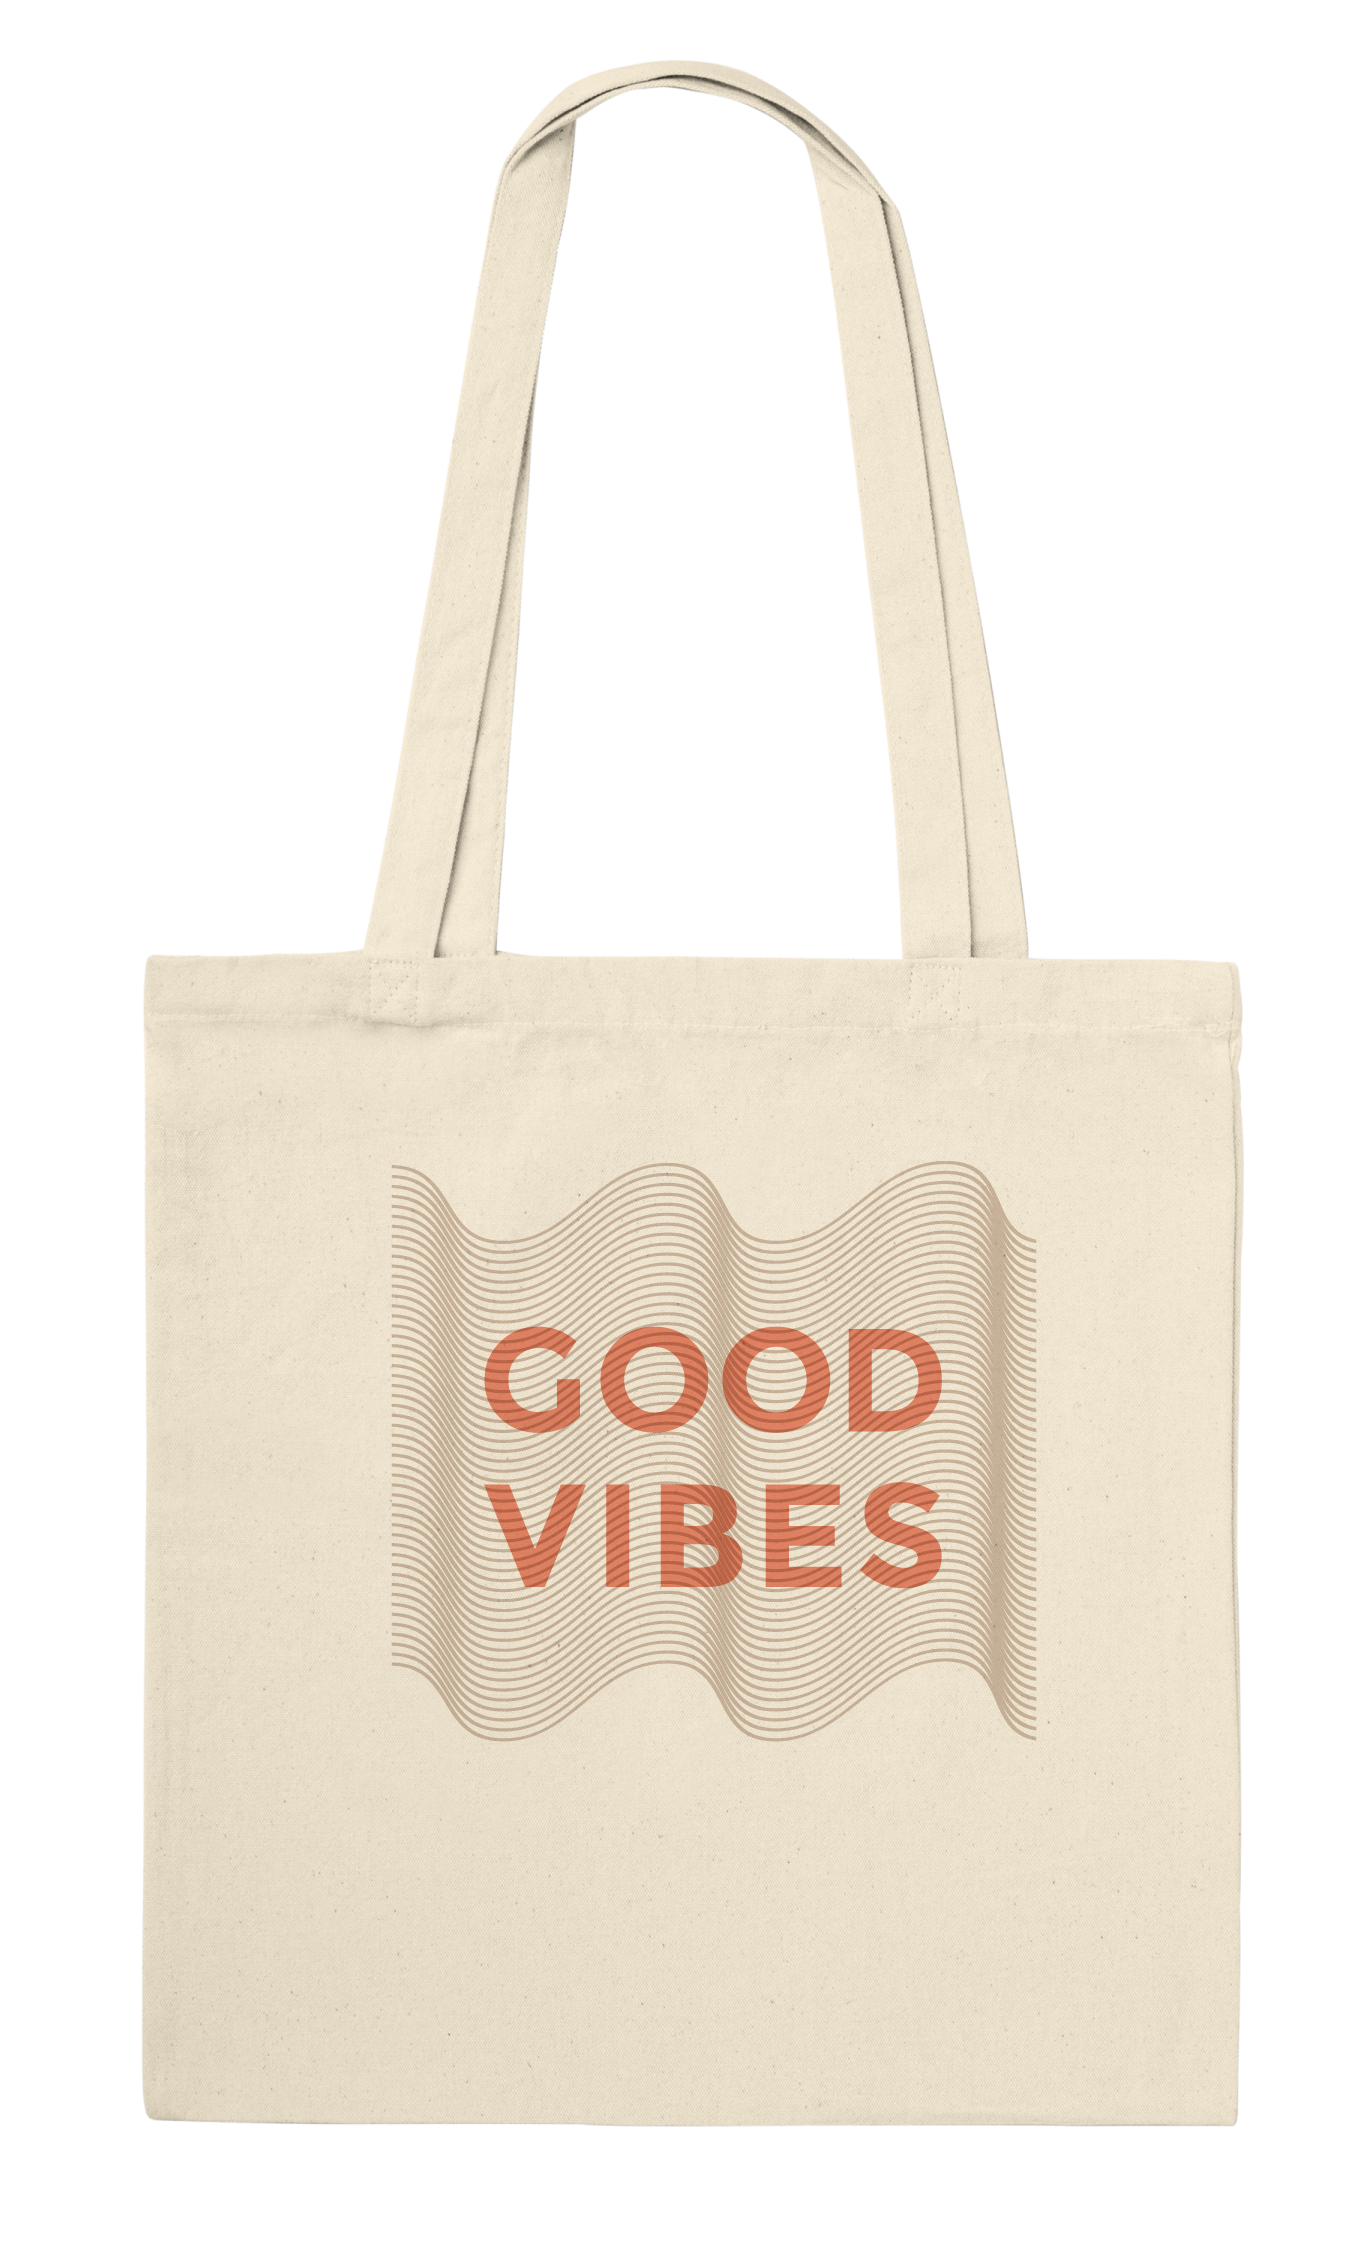 Good Vibes Tote Bag -  グッドバイブトートバッグ